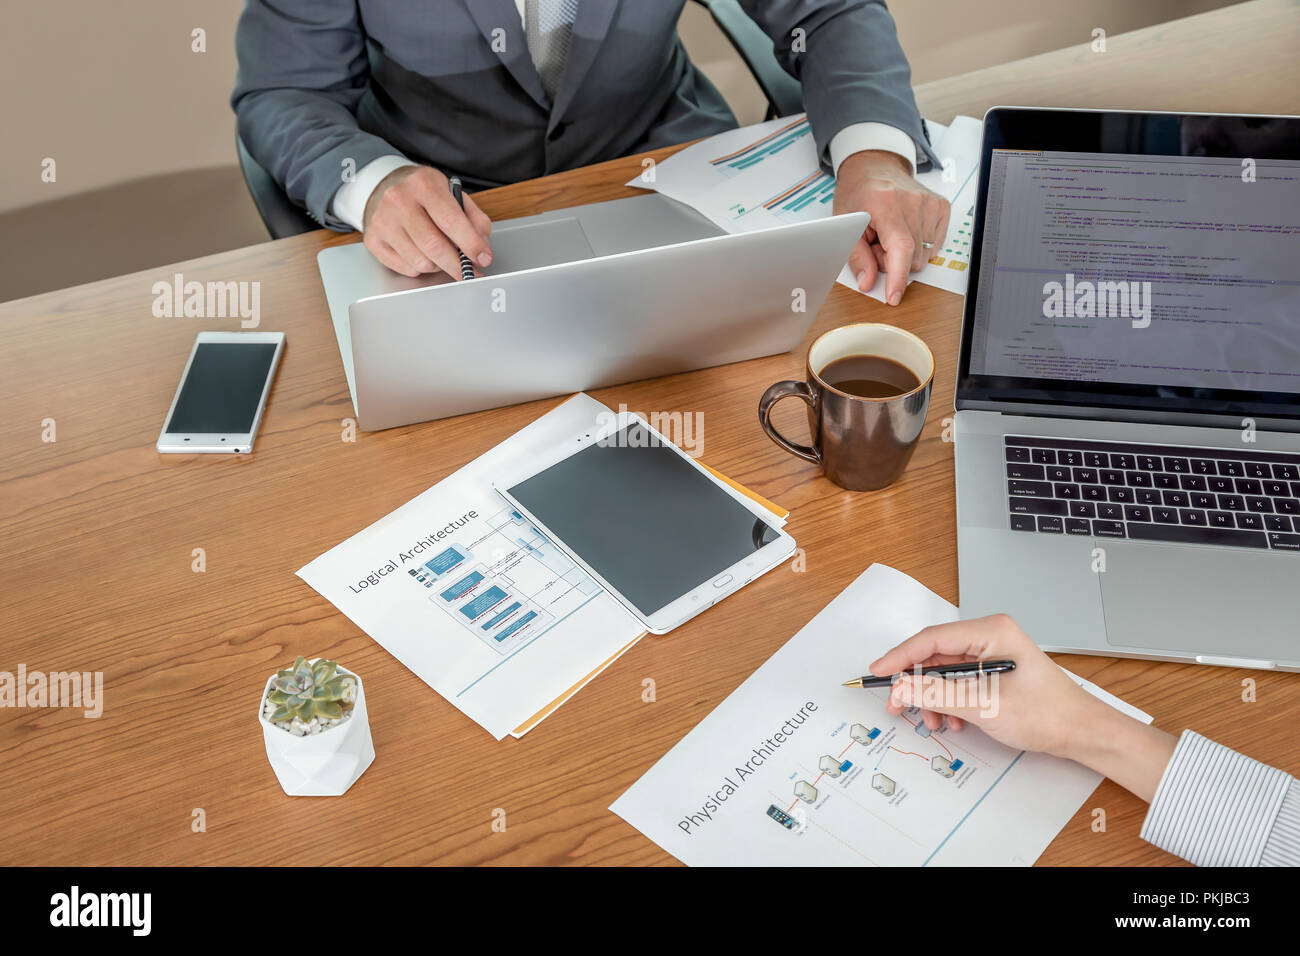 A male and a female colleague working together at the same desk Stock Photo